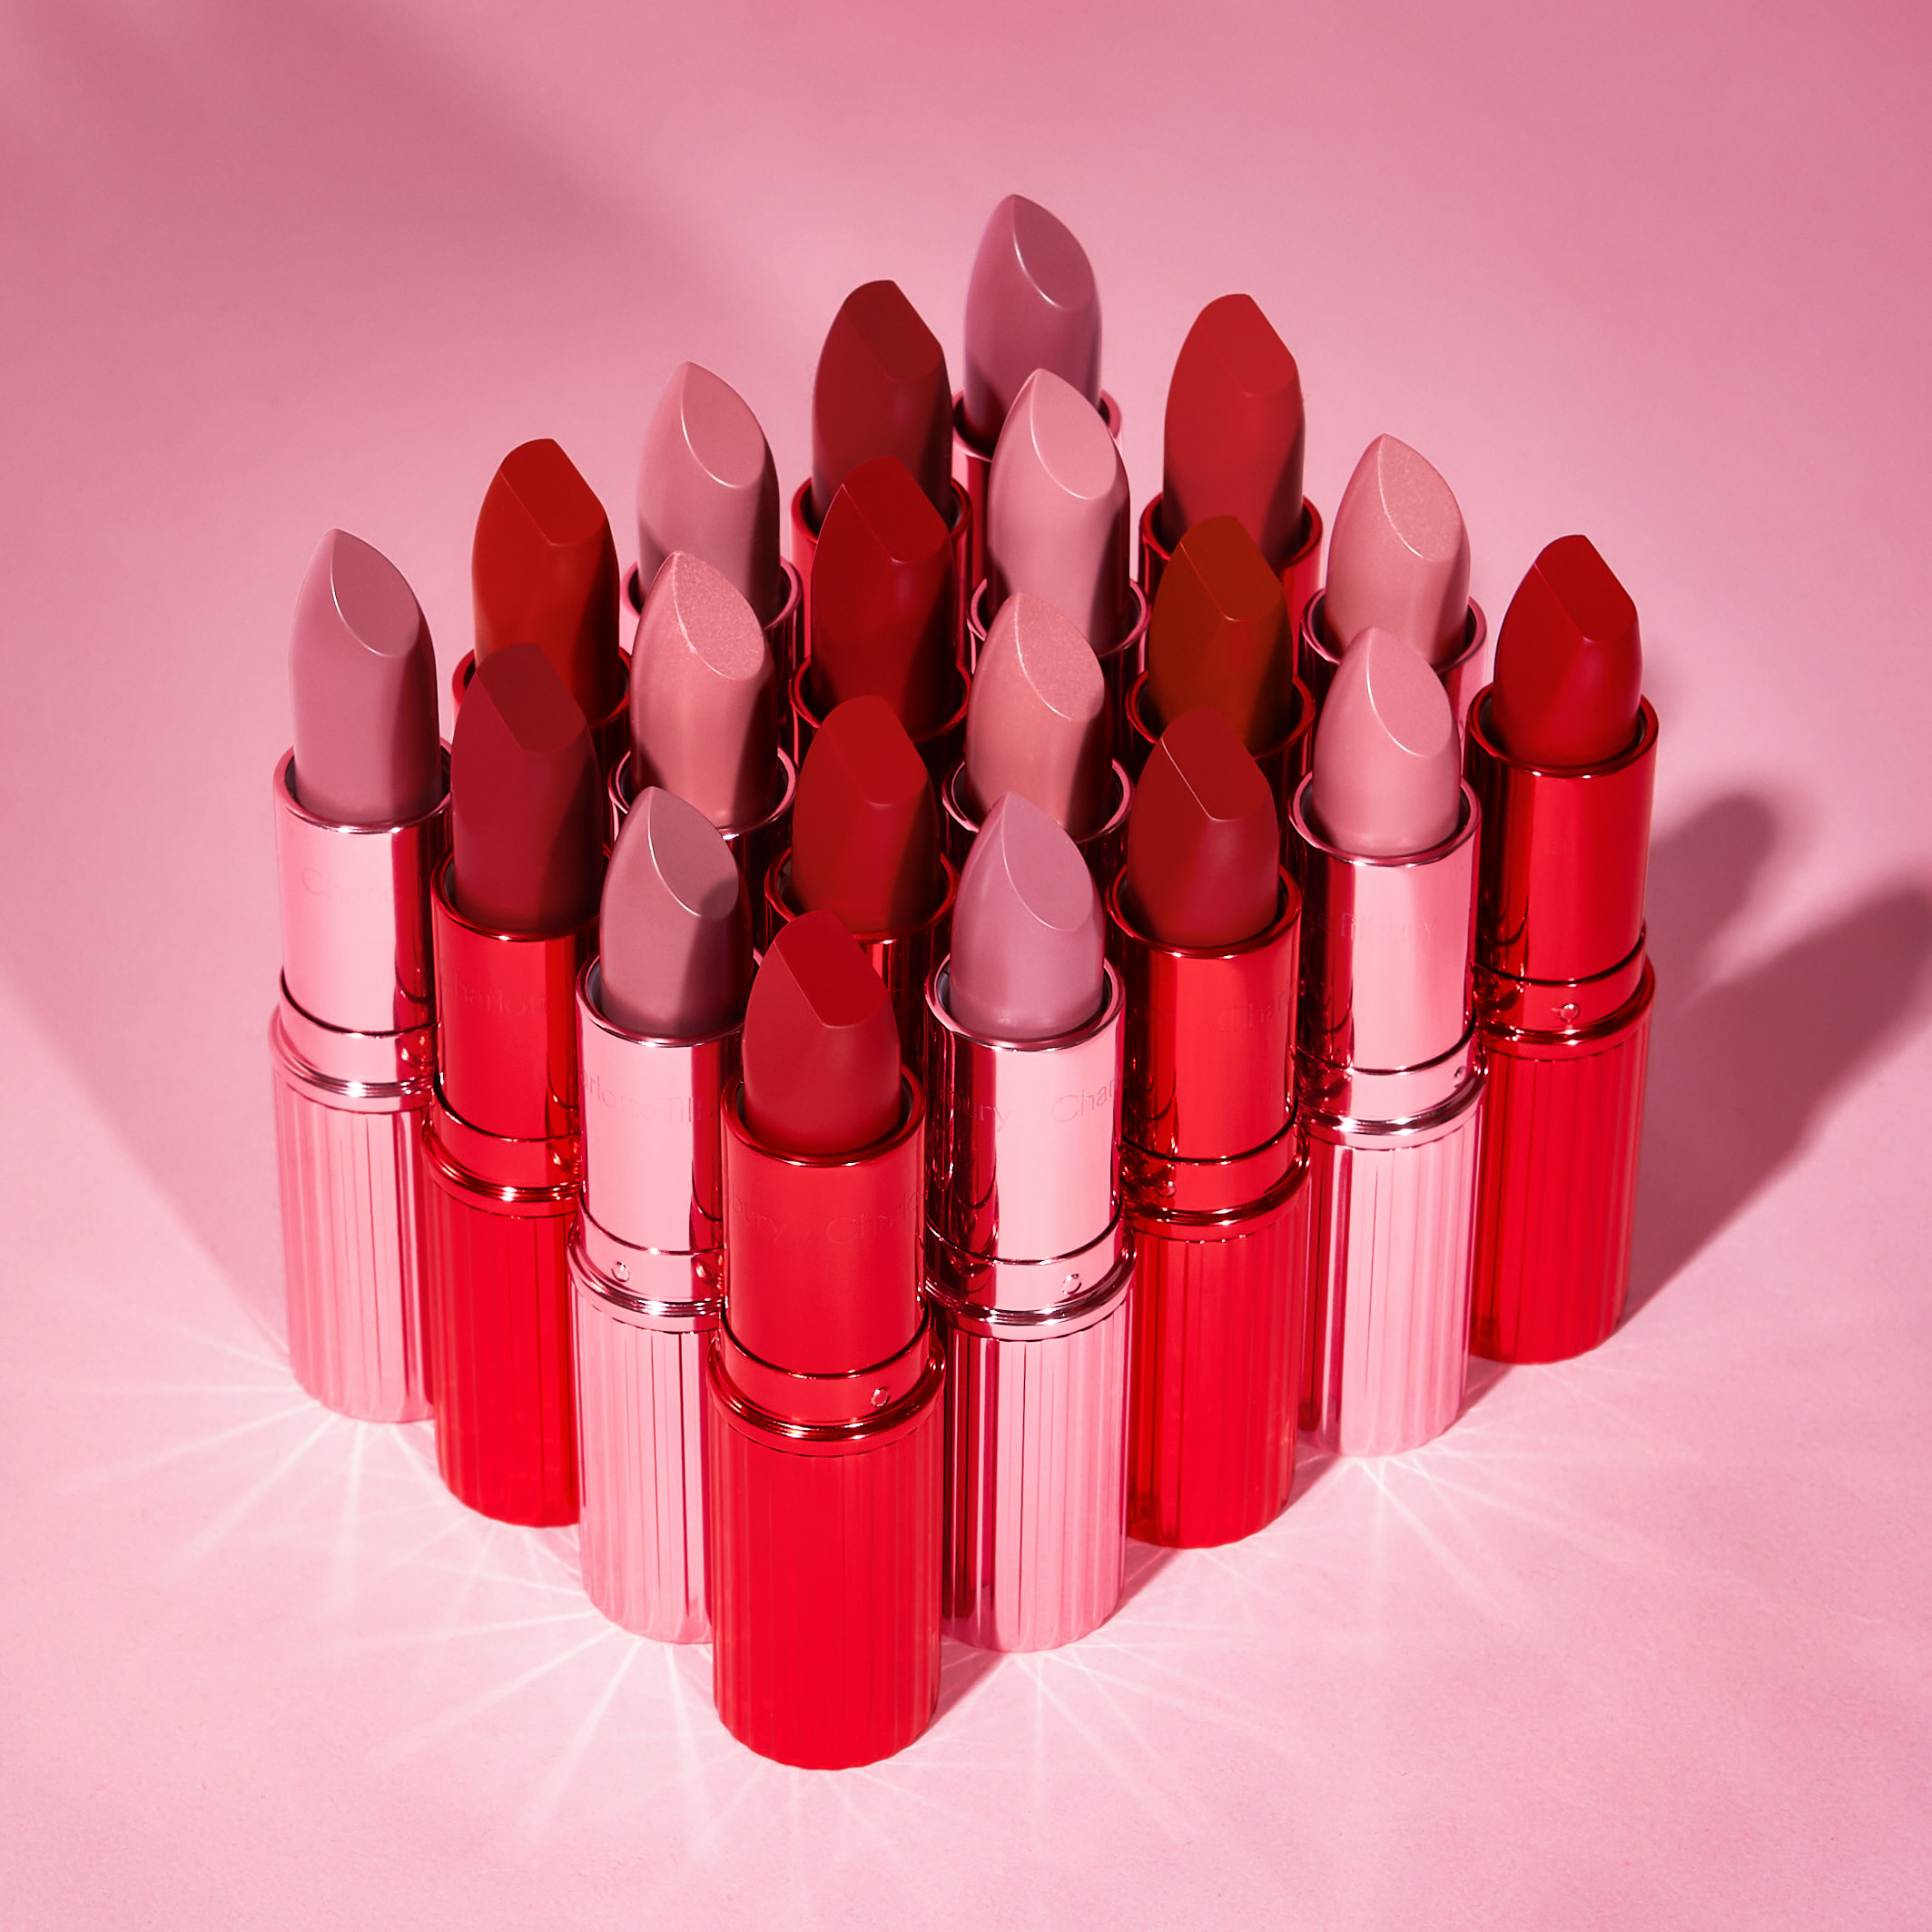 Collection of Charlotte Tilbury lipsticks in a range of pink and red shades to choose from